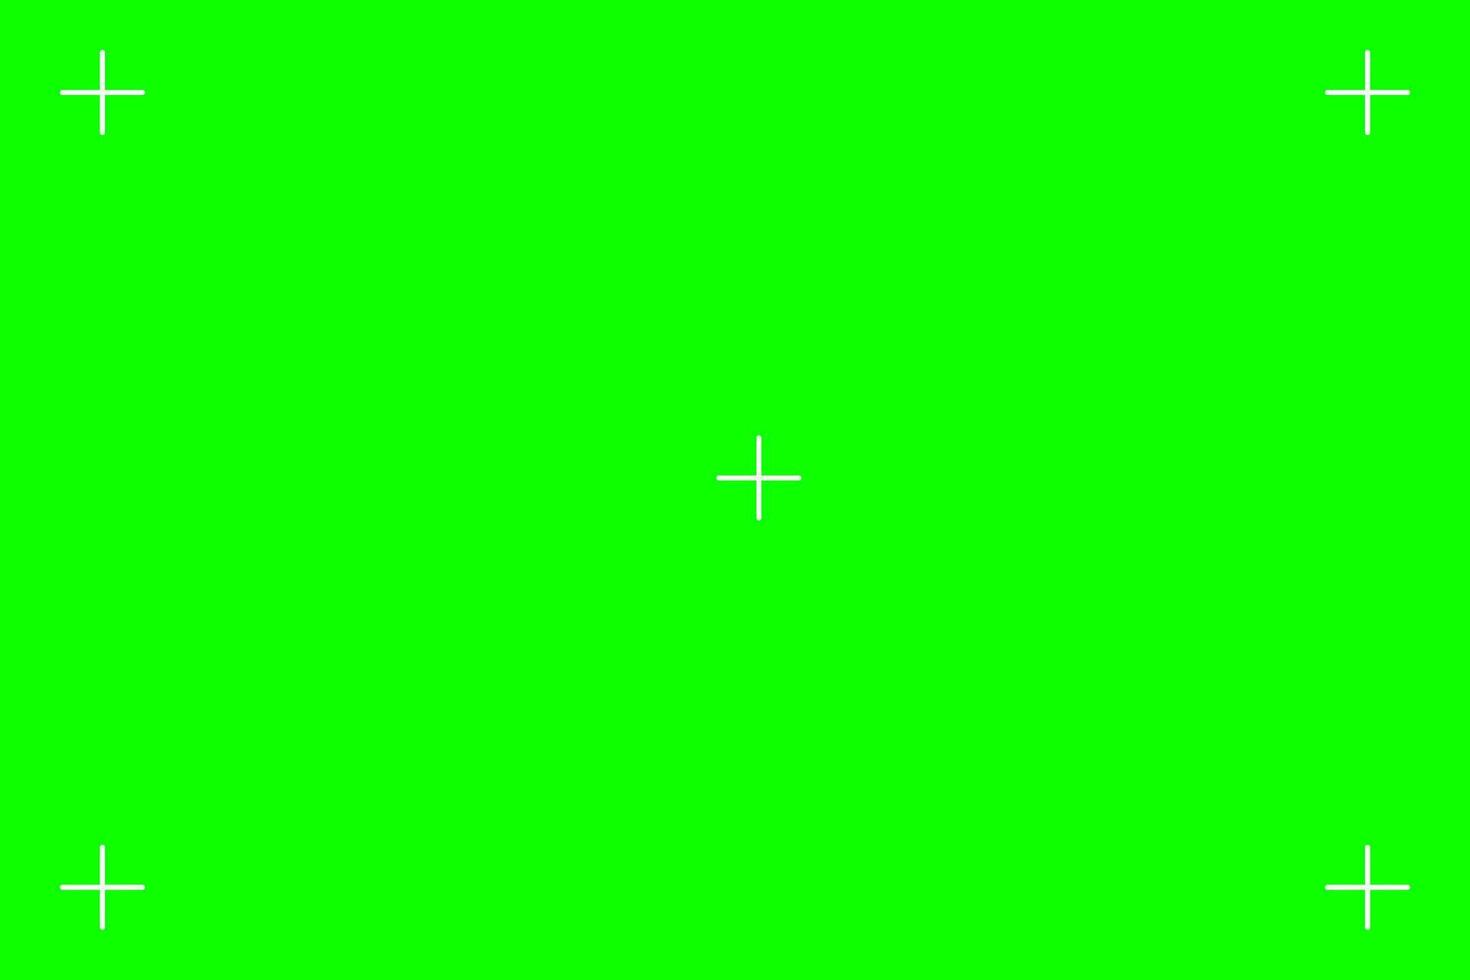 Green screen chroma key background, viewfinder camera frame, video film screen template, overlay. Cinema display with grid. Vector illustration